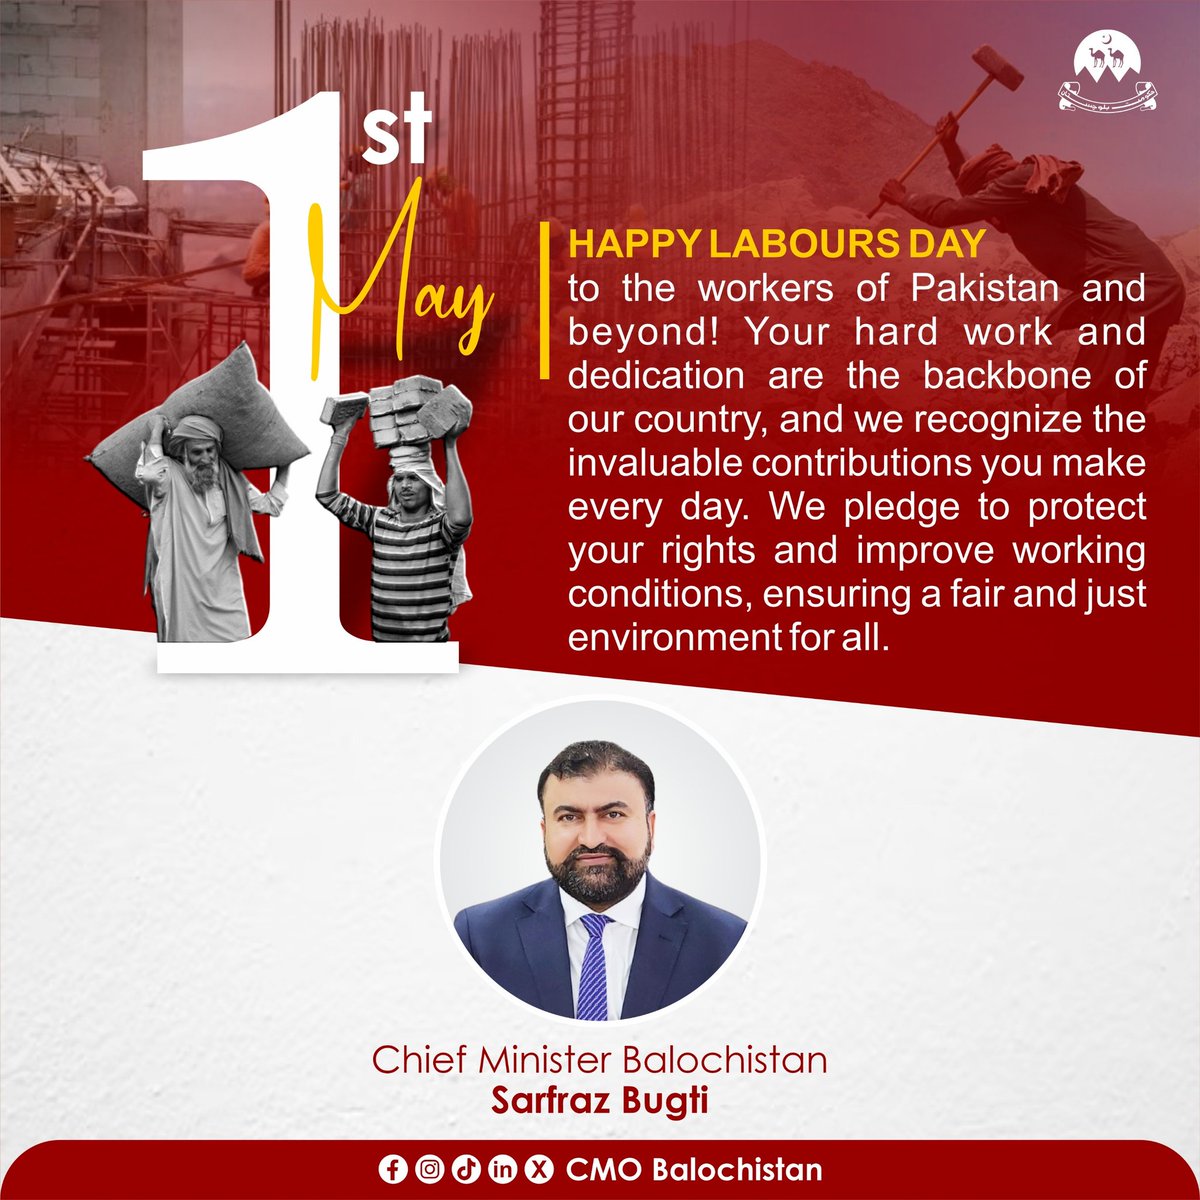 Happy Labours Day to the workers of Pakistan and beyond! Your hard work and dedication are the backbone of our country, and we recognize the invaluable contributions you make every day. We pledge to protect your rights and improve working conditions, ensuring a fair and just